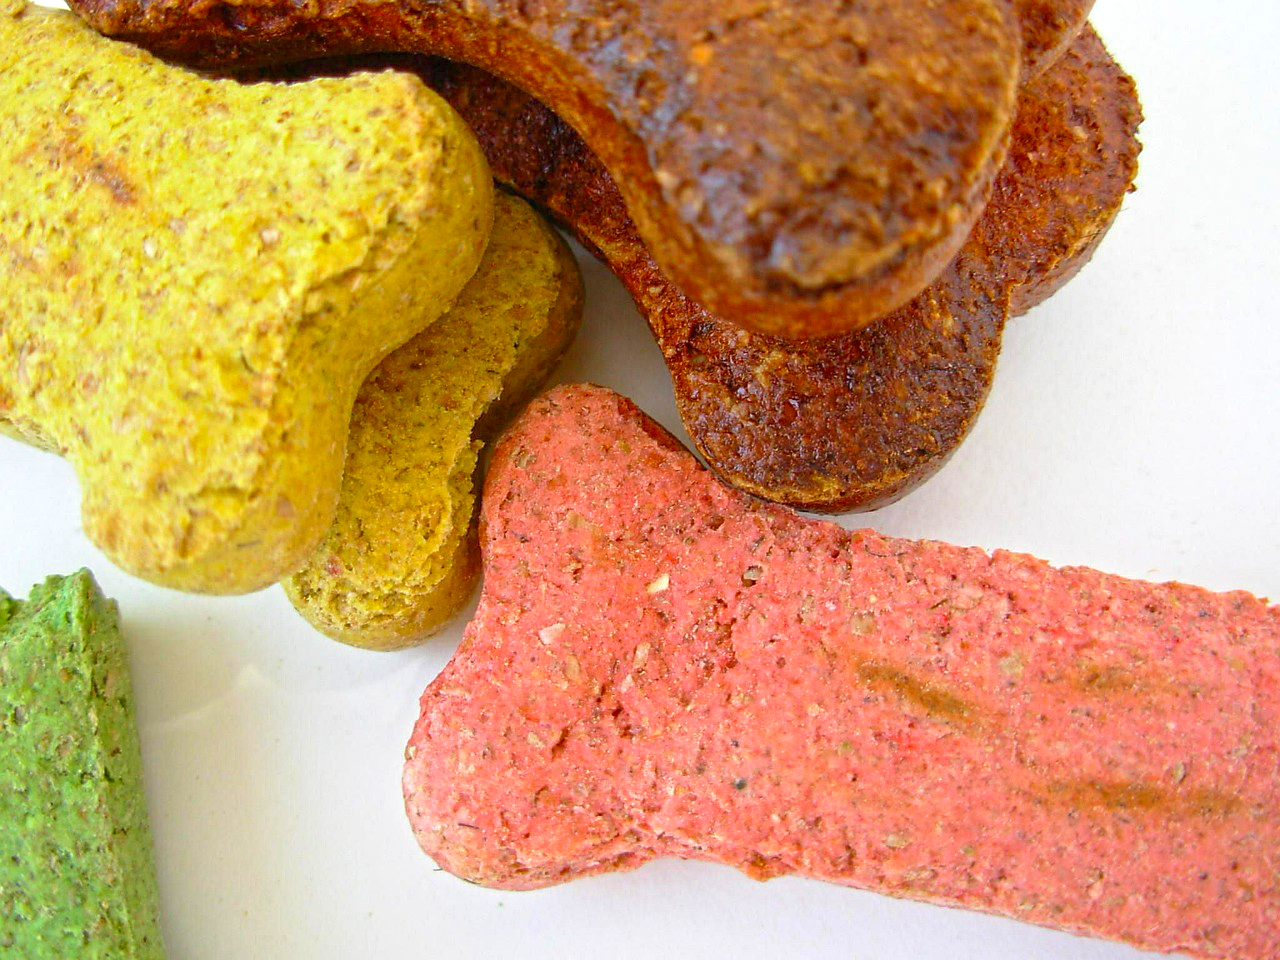 Picture of dog treats